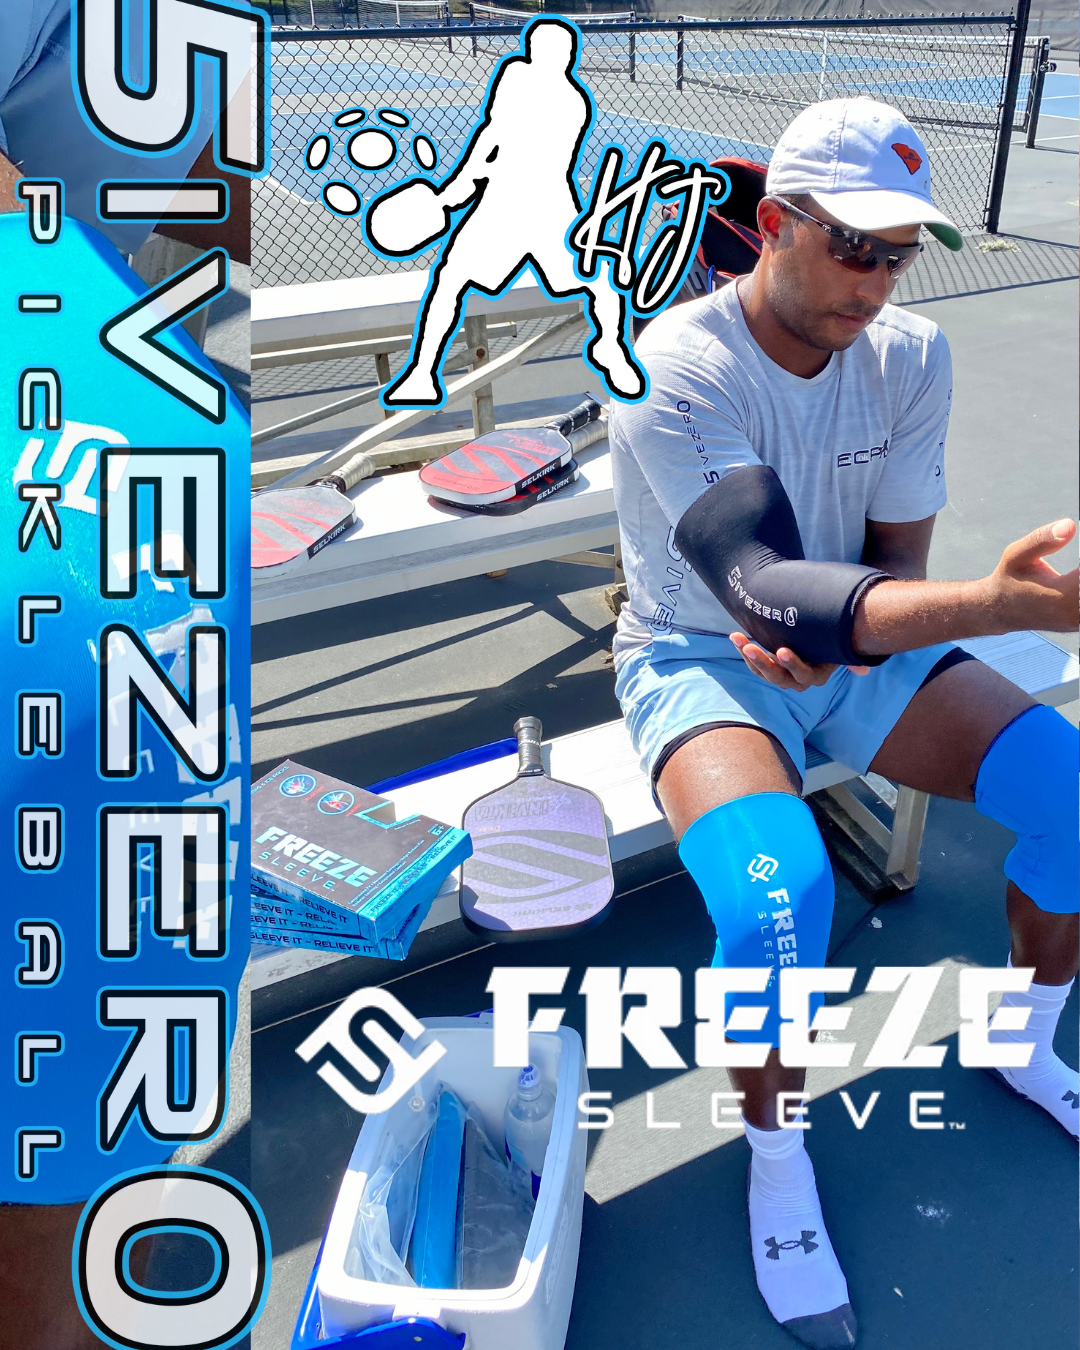 Freeze Sleeve Cold Therapy